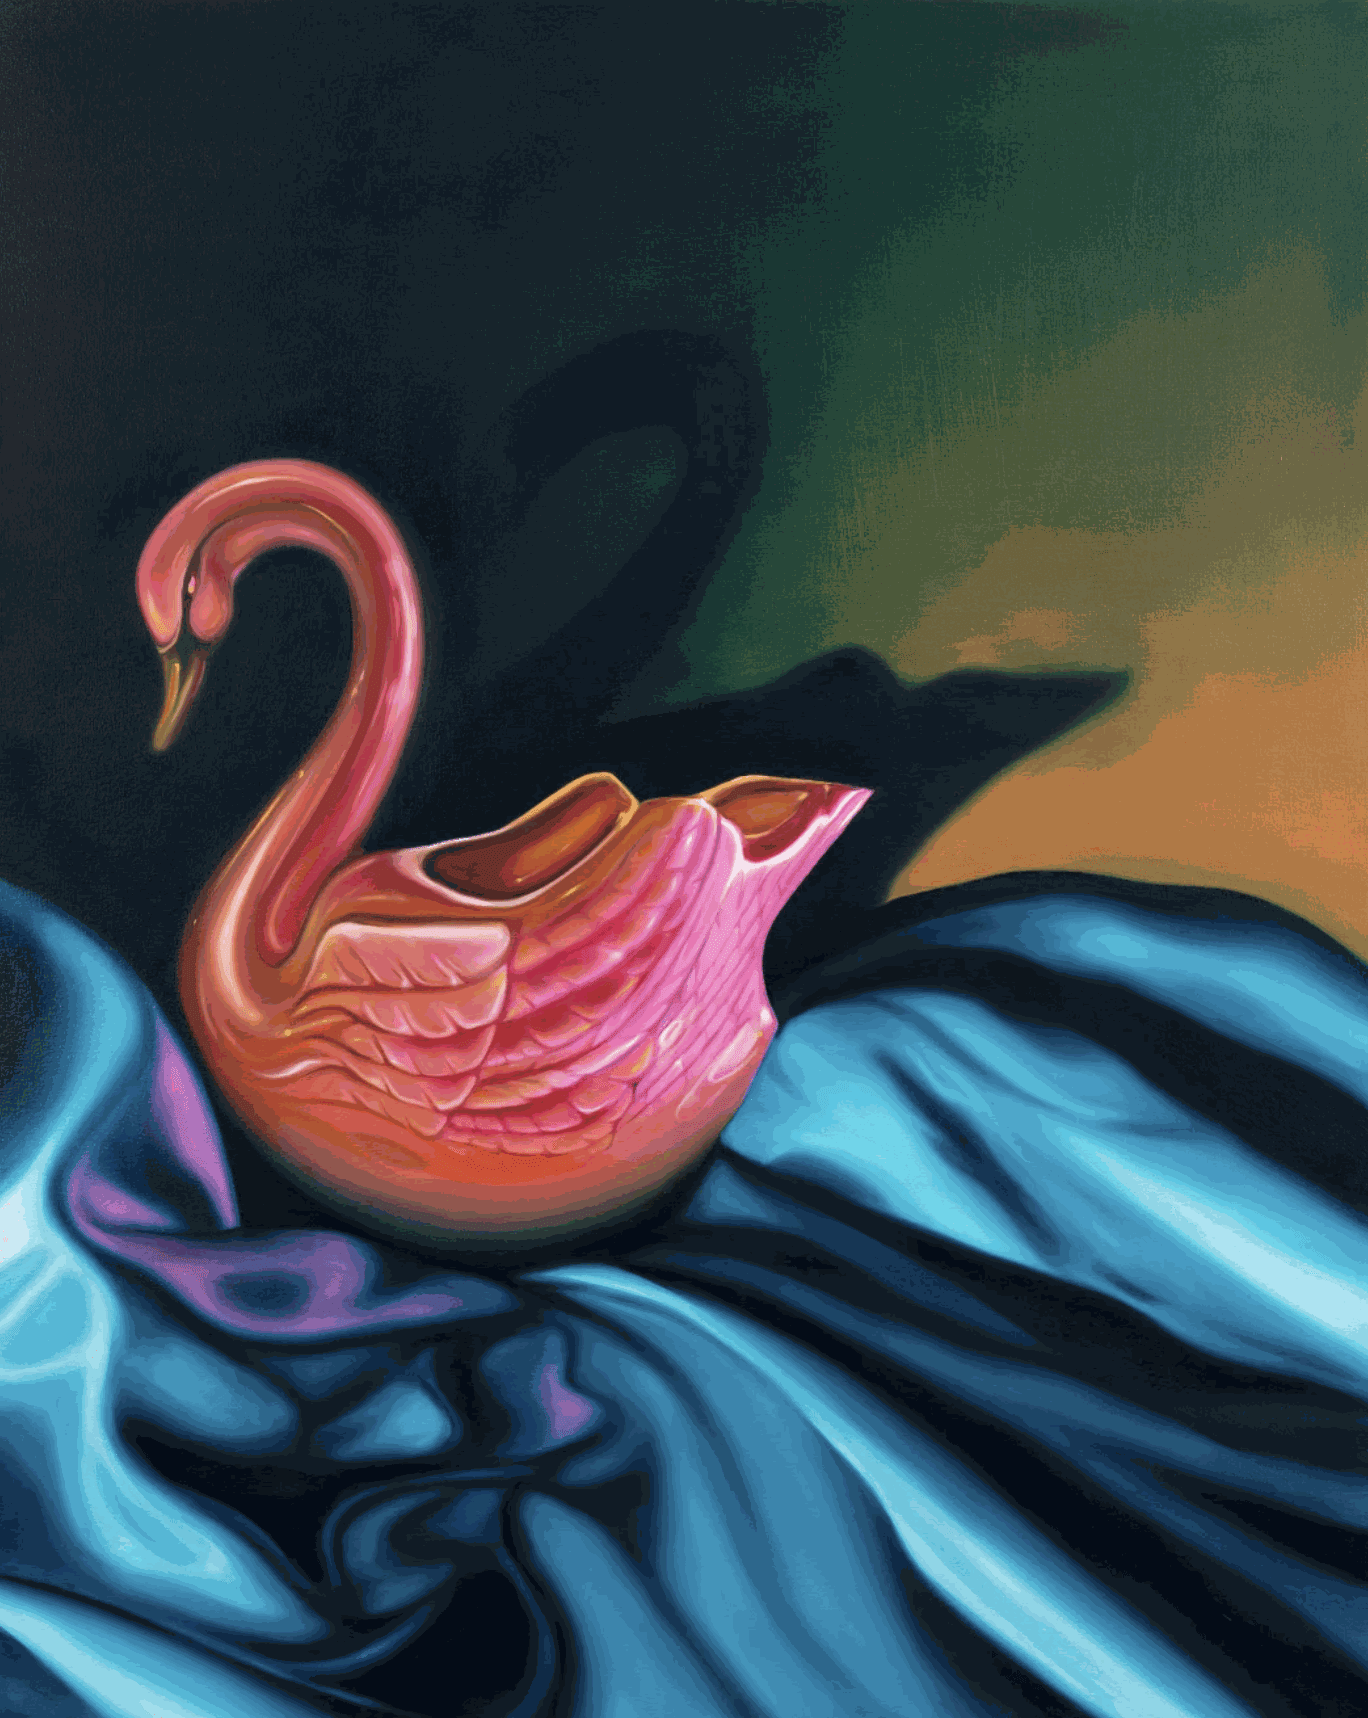 painting of a pink swan on a blue cloth by douglas de souza